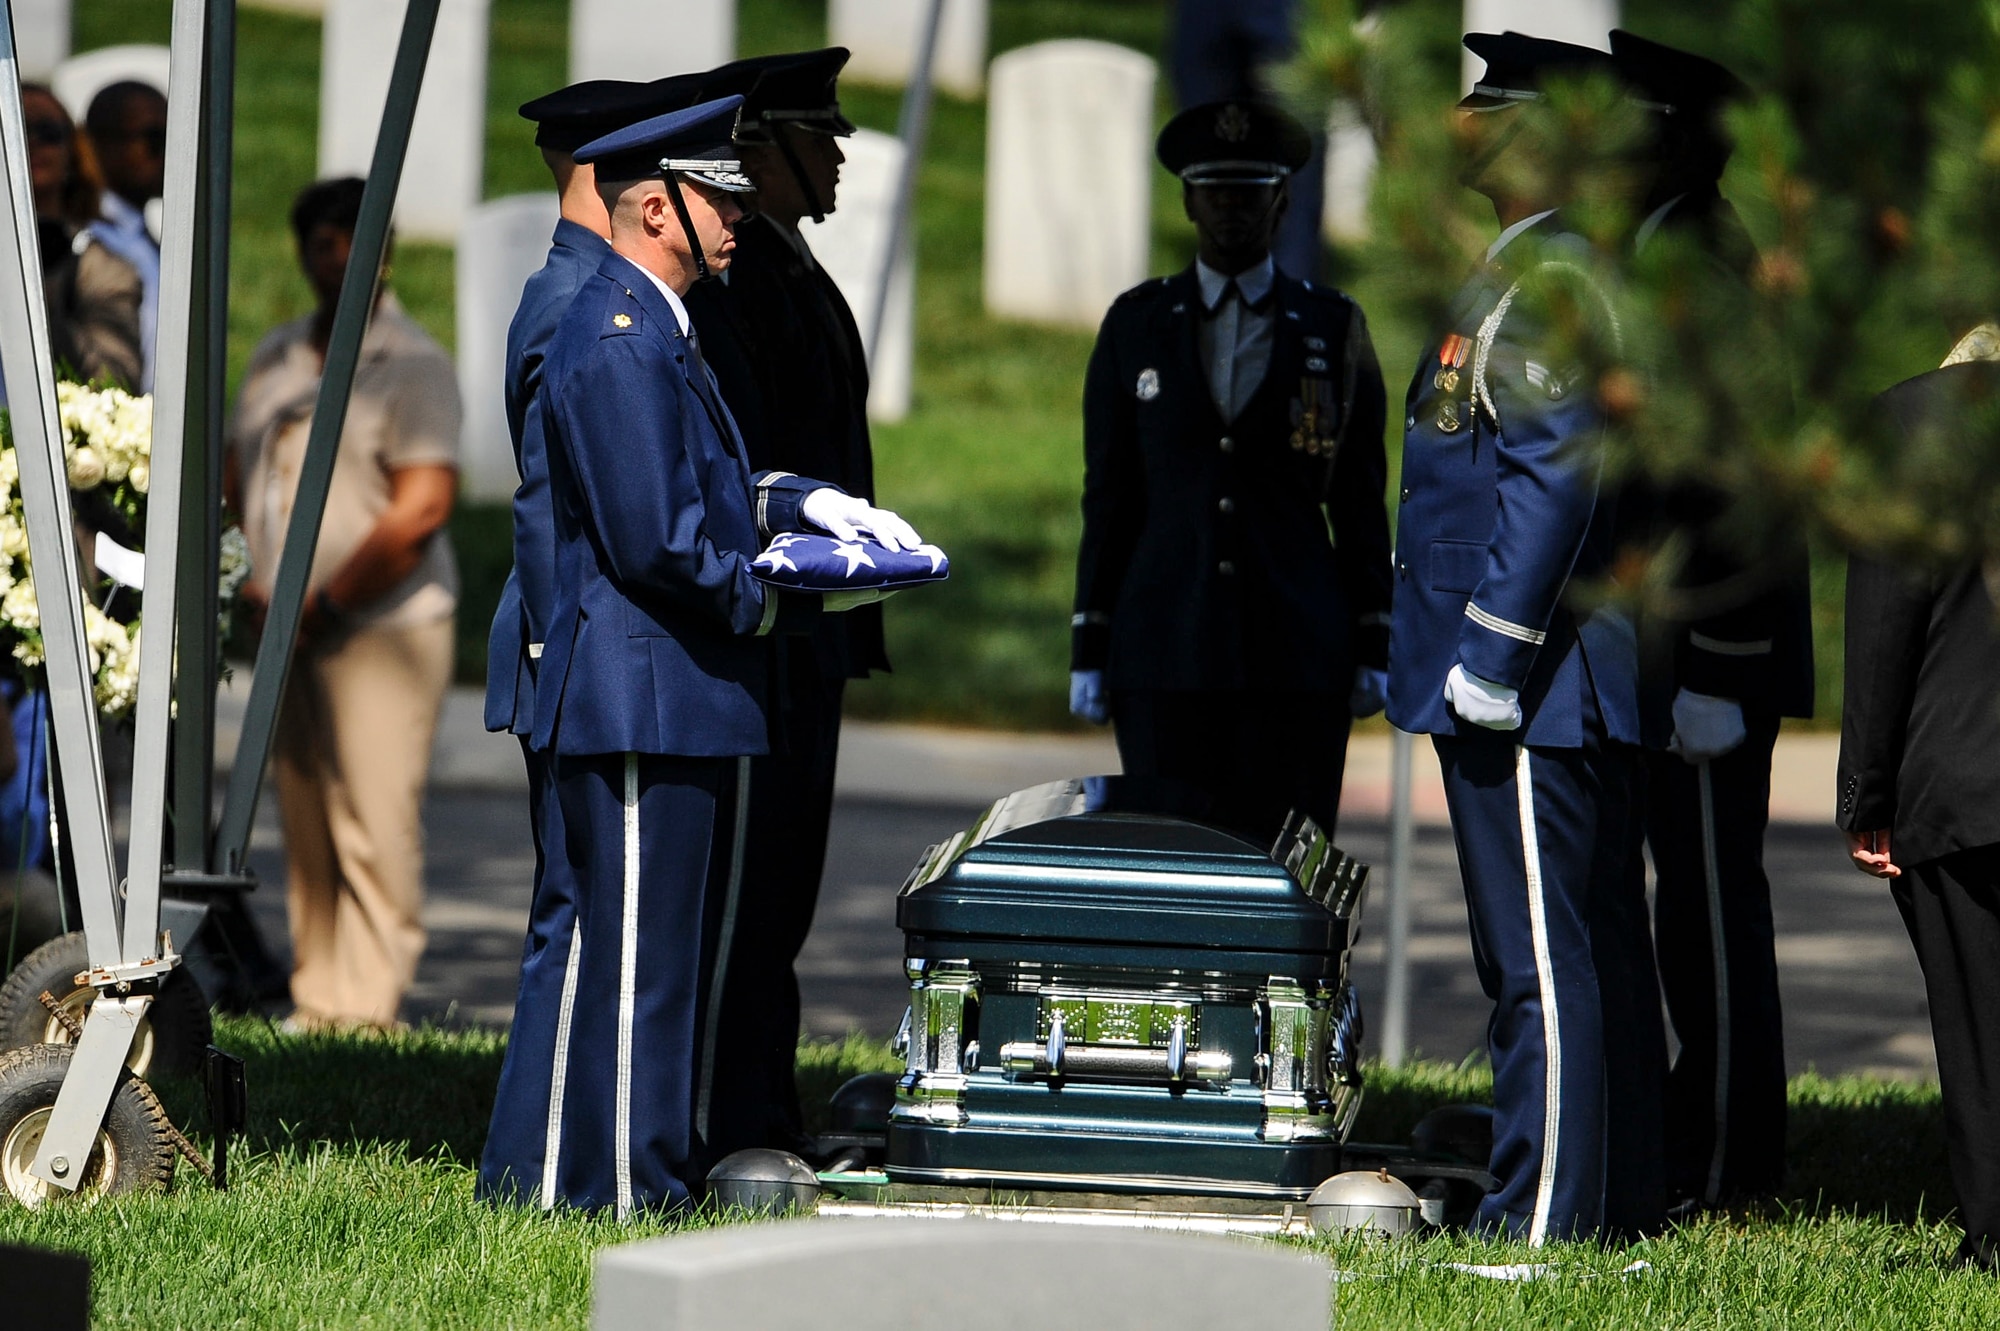 Chaplain (Maj.) Kevin Hudson conducts the final inspection of former 2nd Lt. Malvin G. Whitfield’s flag before presenting it to his wife, Nola, at a graveside ceremony at Arlington National Cemetery, Va., June 8, 2016. Whitfield died Nov. 19, 2015, at the age of 91. (U.S. Air Force photo/Tech. Sgt. Bryan Franks)